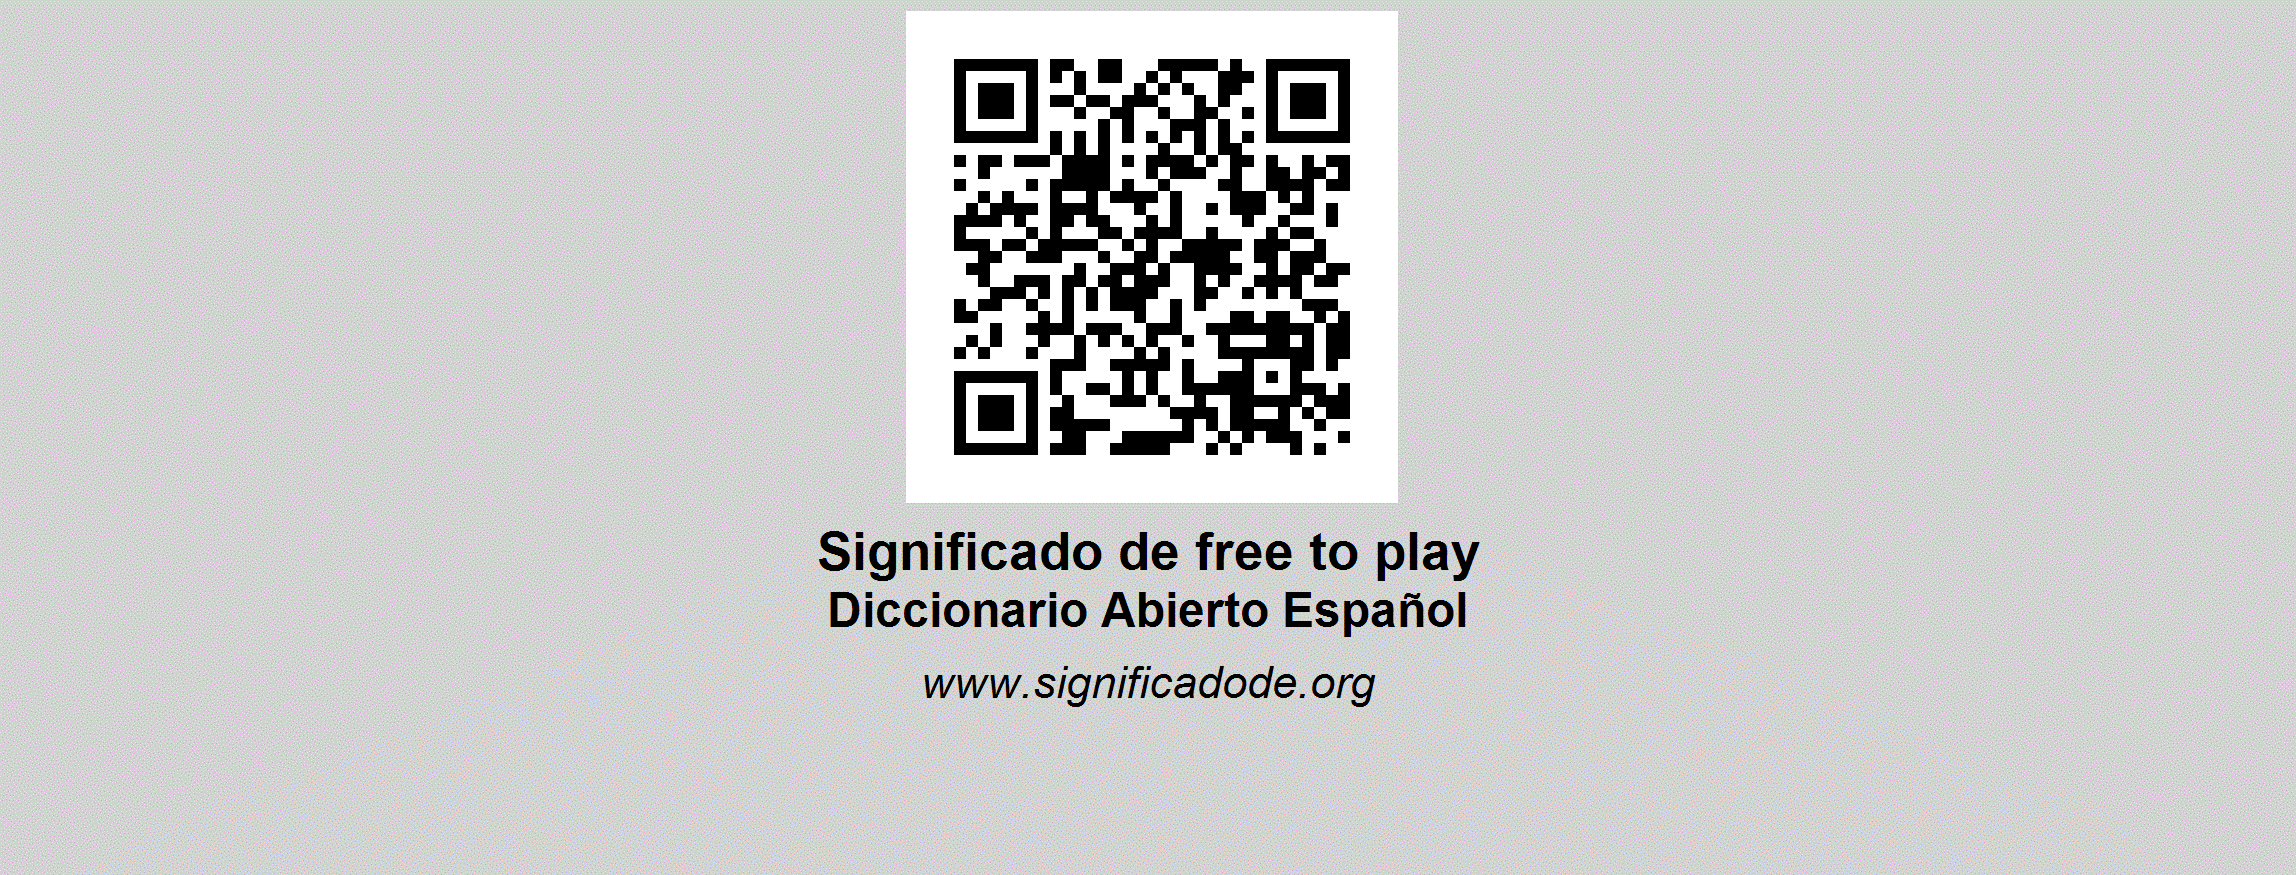 Free to play, ¿Qué significa Free to play?